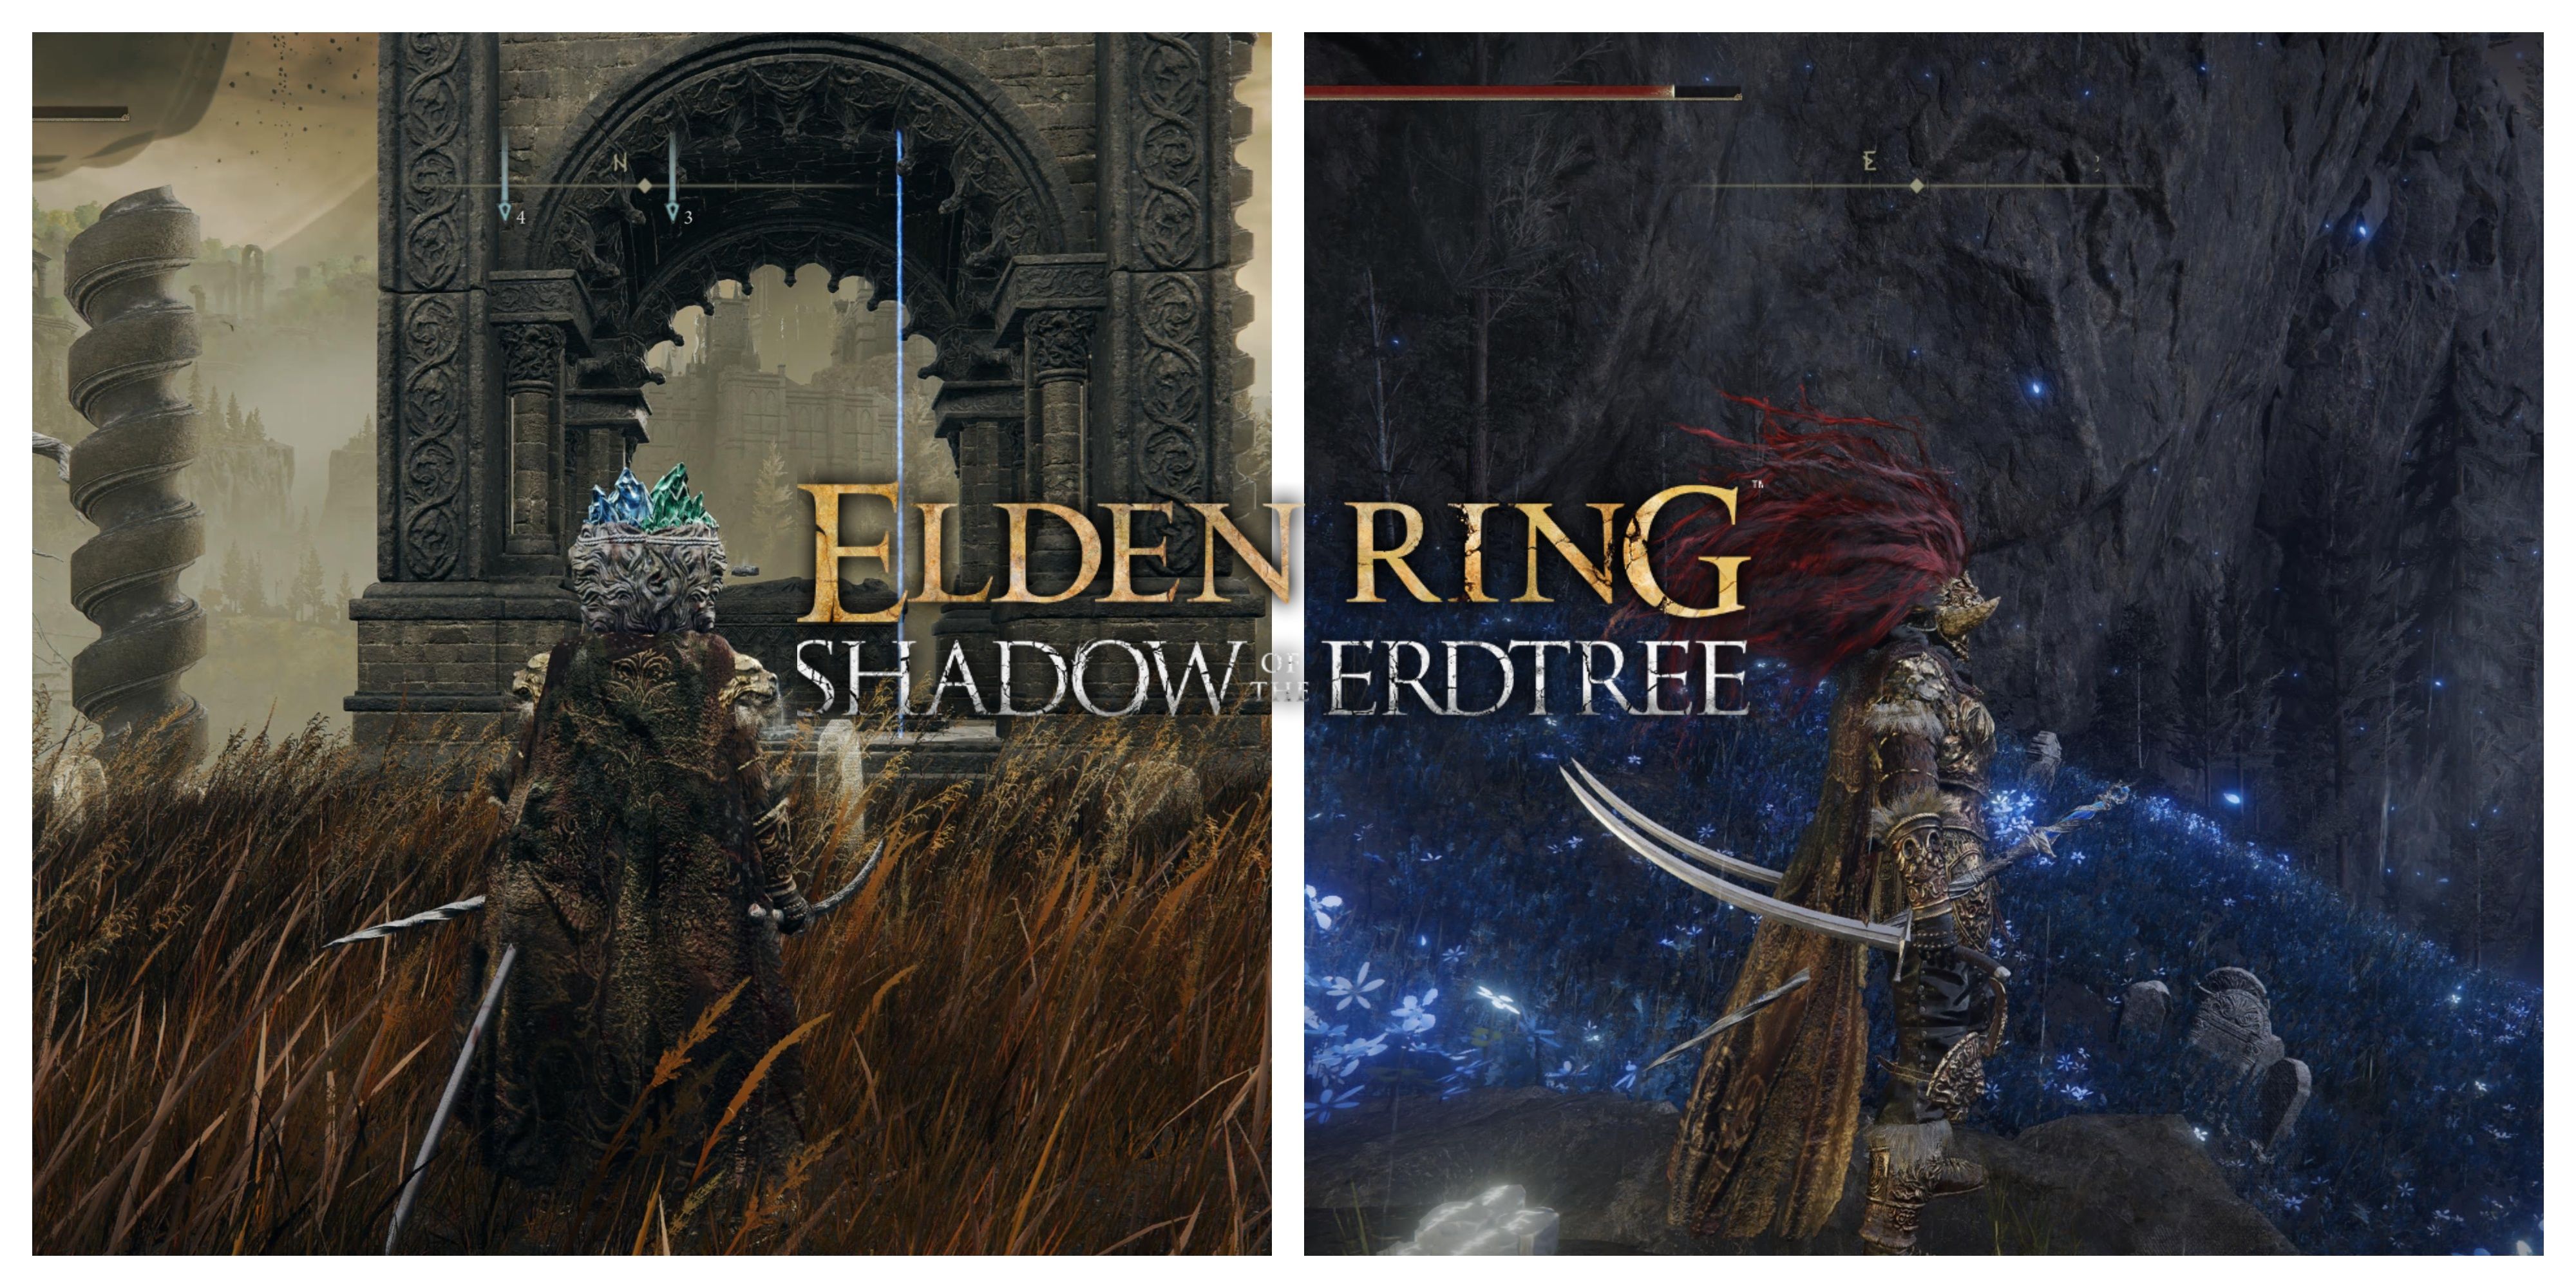 elden ring shaodw of the erdtree backhand blade location 2